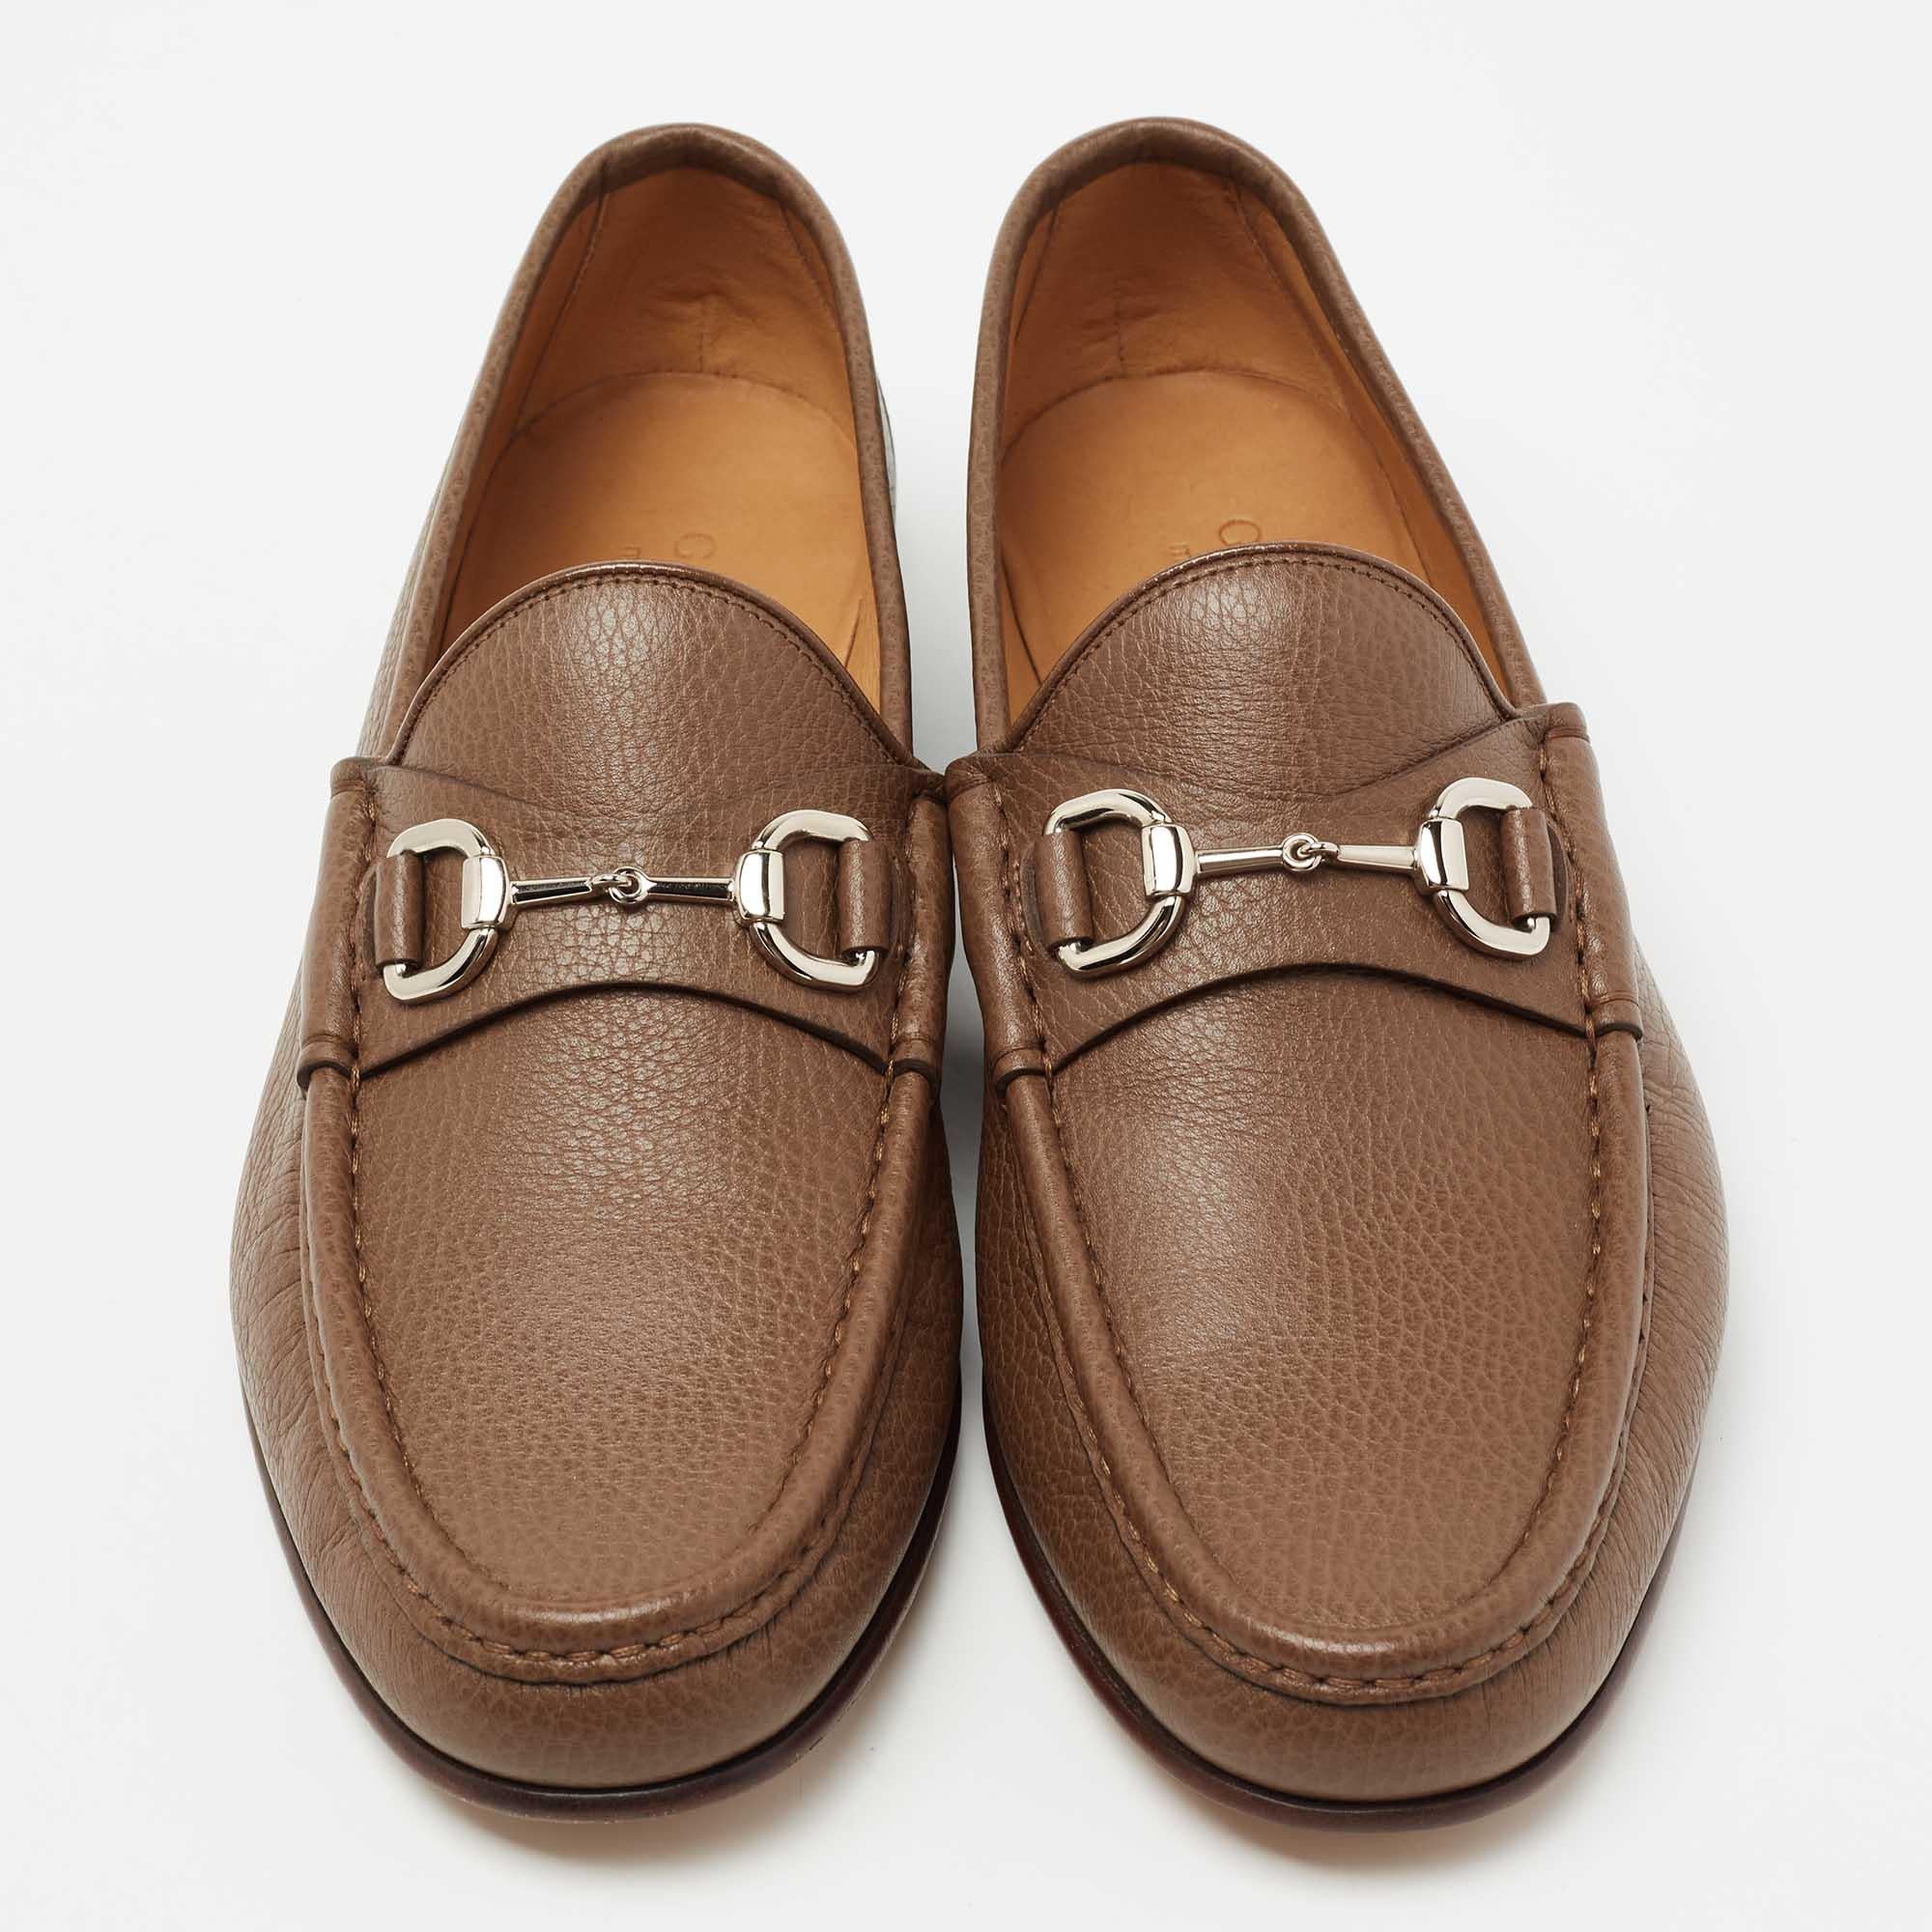 A pair of loafers are a timeless wardrobe essential, and this pair from Gucci is instant love. Made in brown leather, these sleek loafers are accented with silver-tone Horsebit details on the uppers, a signature of the label. They are complete with